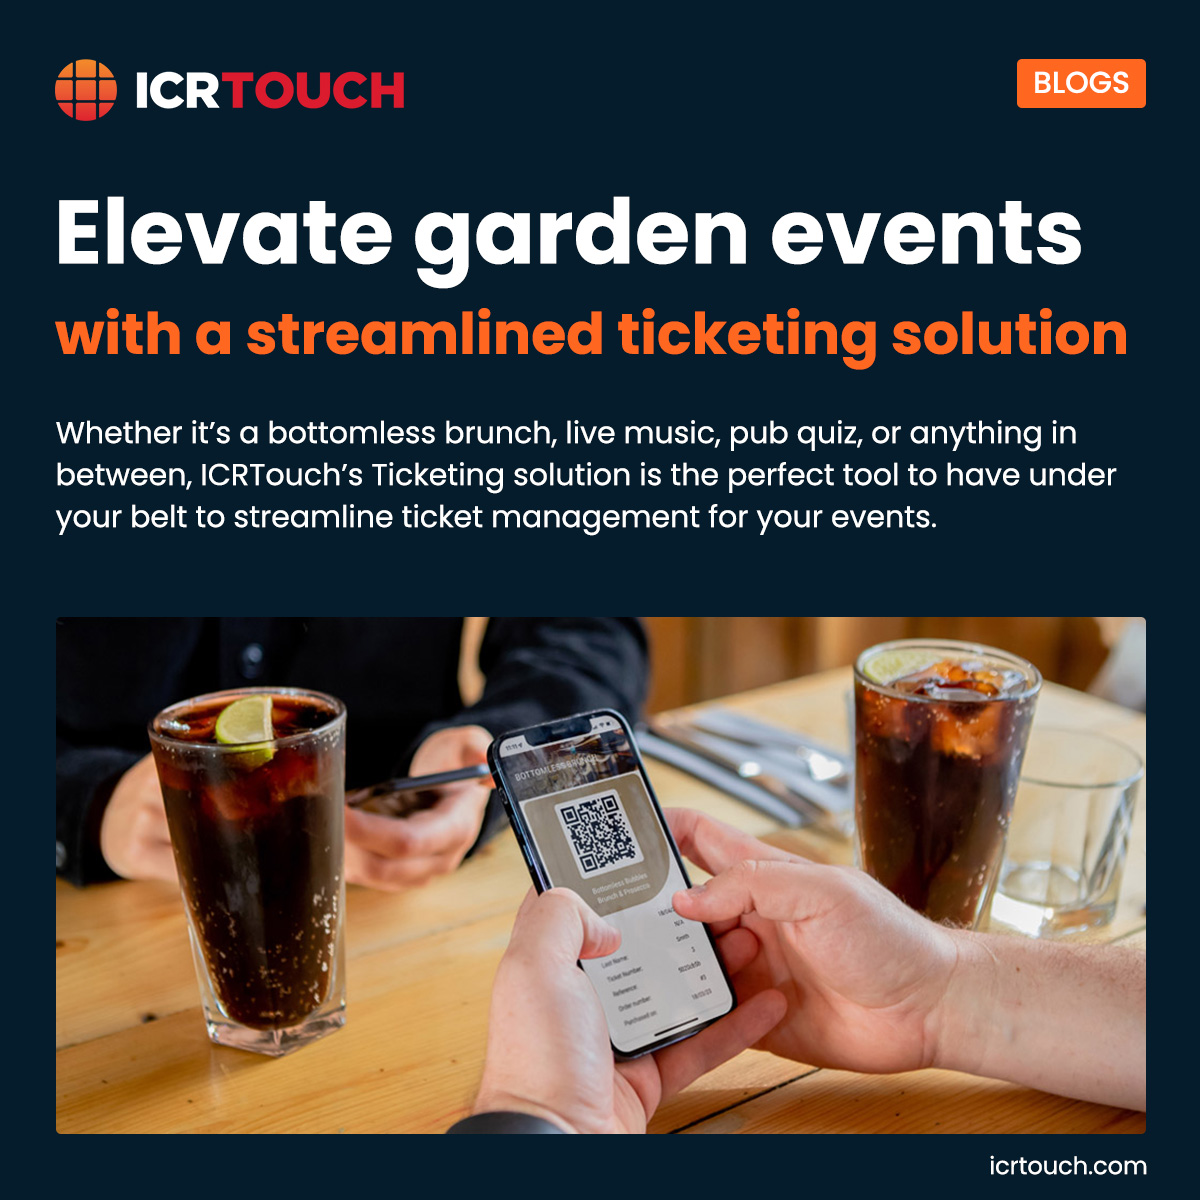 As the warm weather approaches, it’s time to consider how to best utilise your spaces, and events could be the perfect option to bring in even more customers 

Read the full blog here: bit.ly/4dQ0l2u

#weareICRTouch